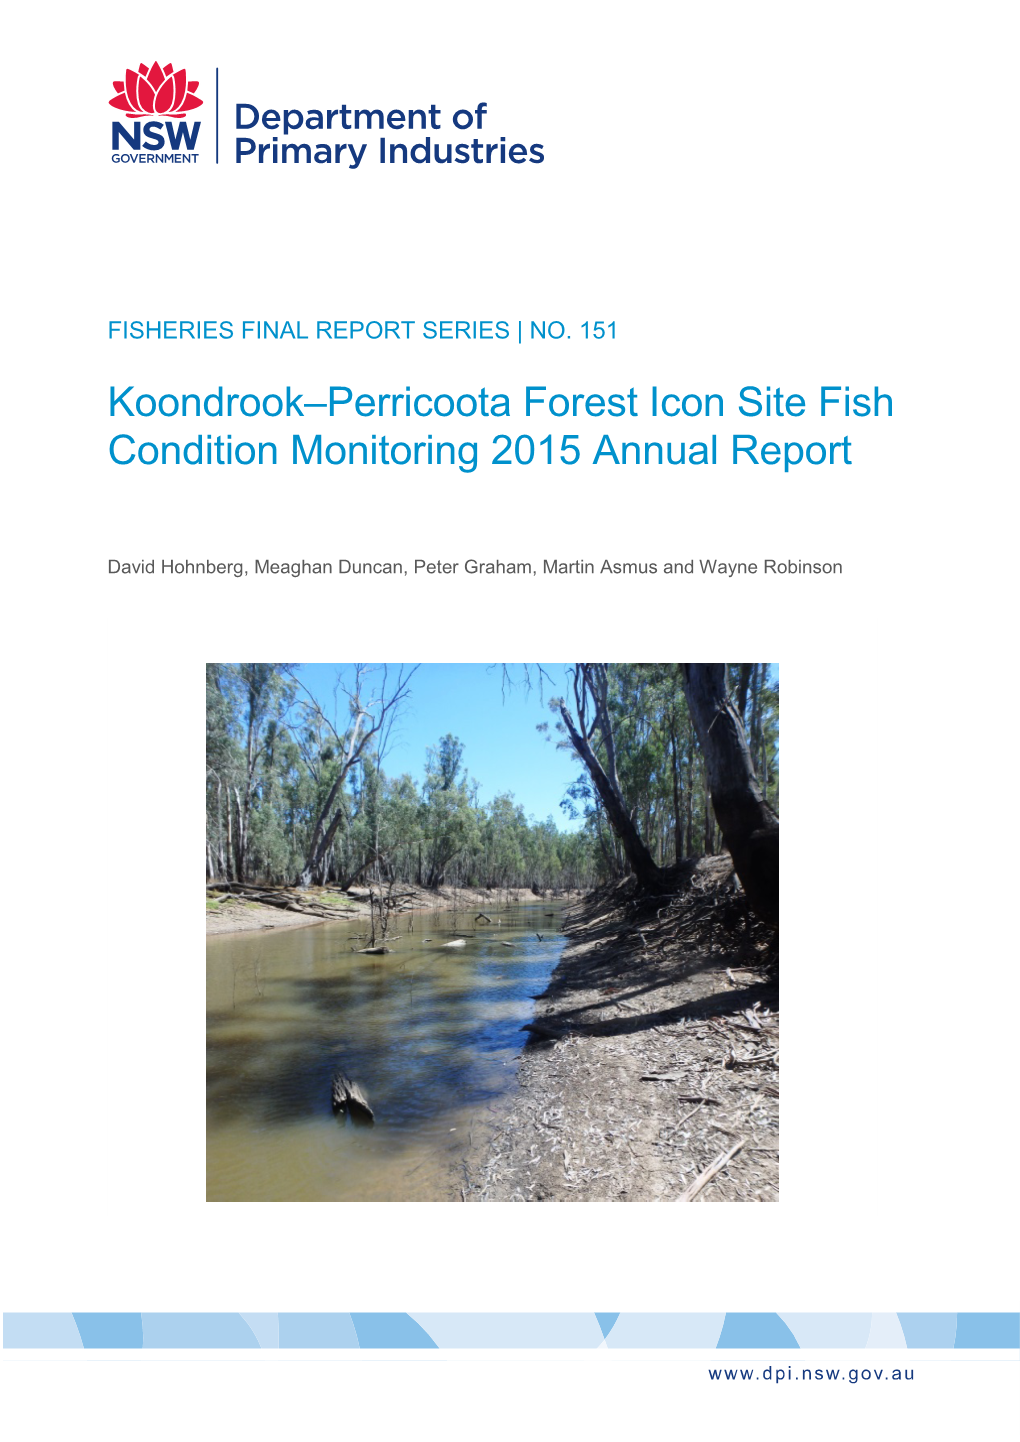 Koondrook–Perricoota Forest Icon Site Fish Condition Monitoring 2015 Annual Report